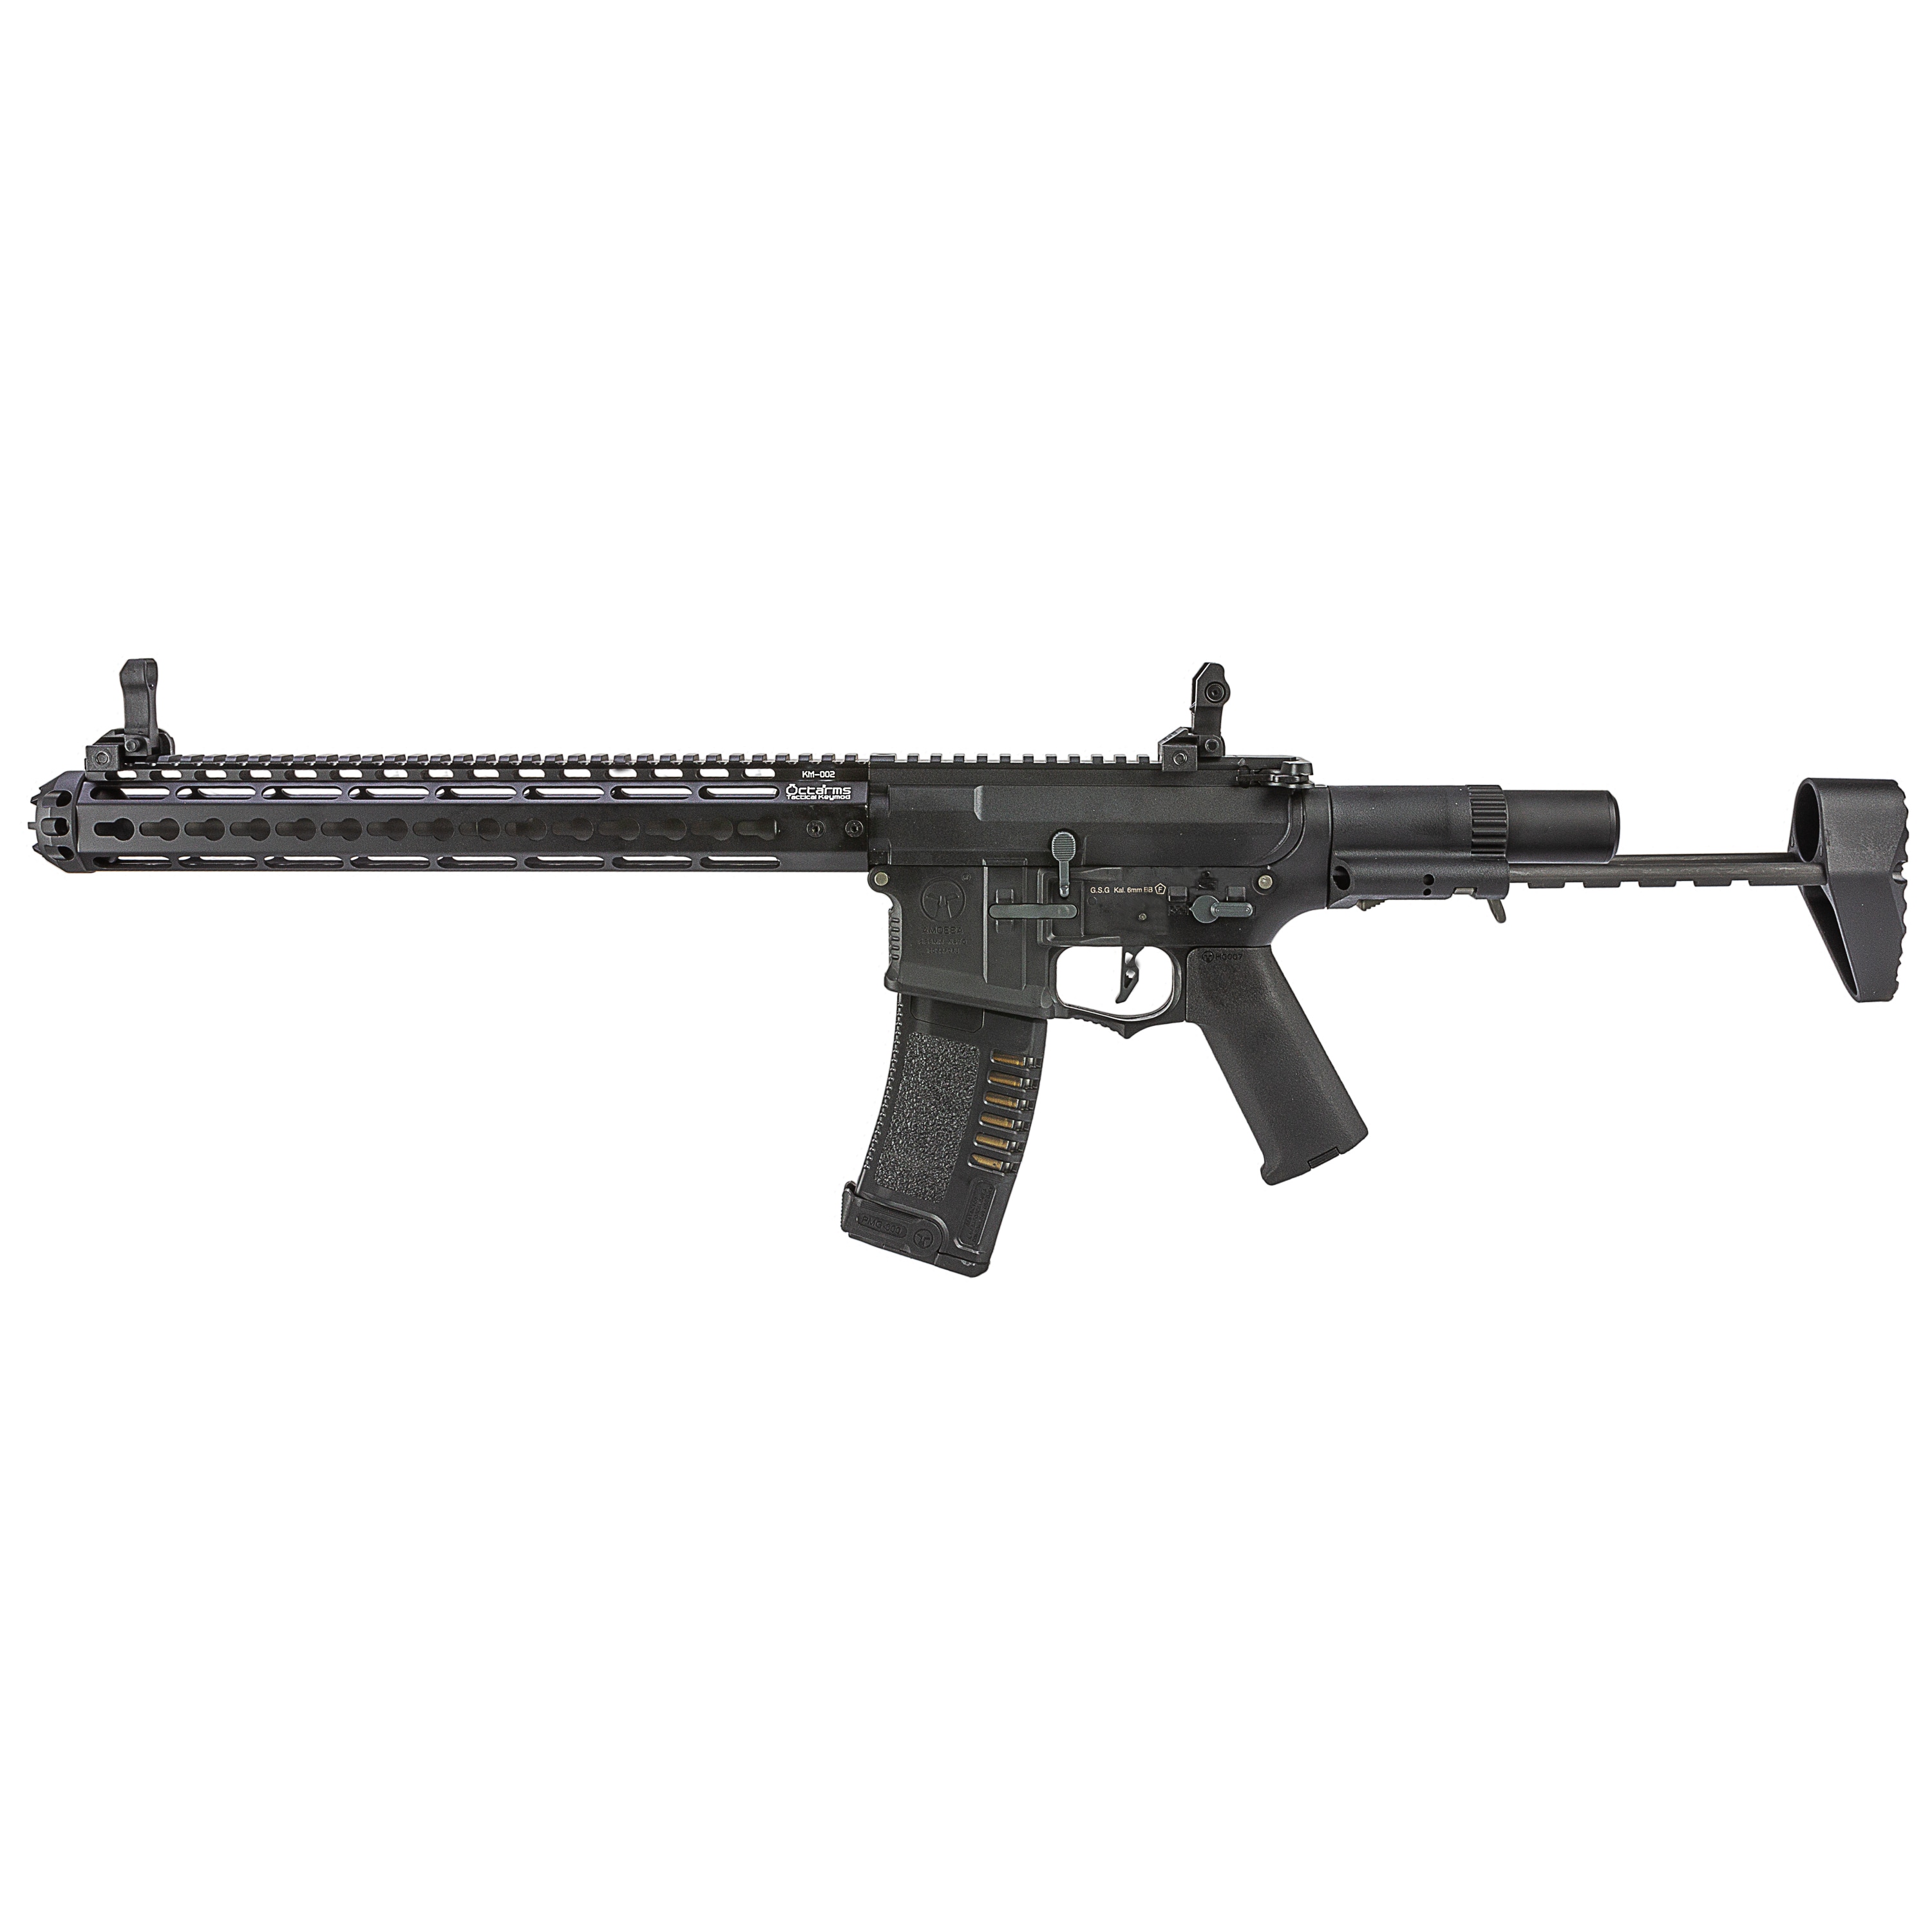 Ares Airsoft Octaarms Amoeba M4 016 1.3 J S-AEG black